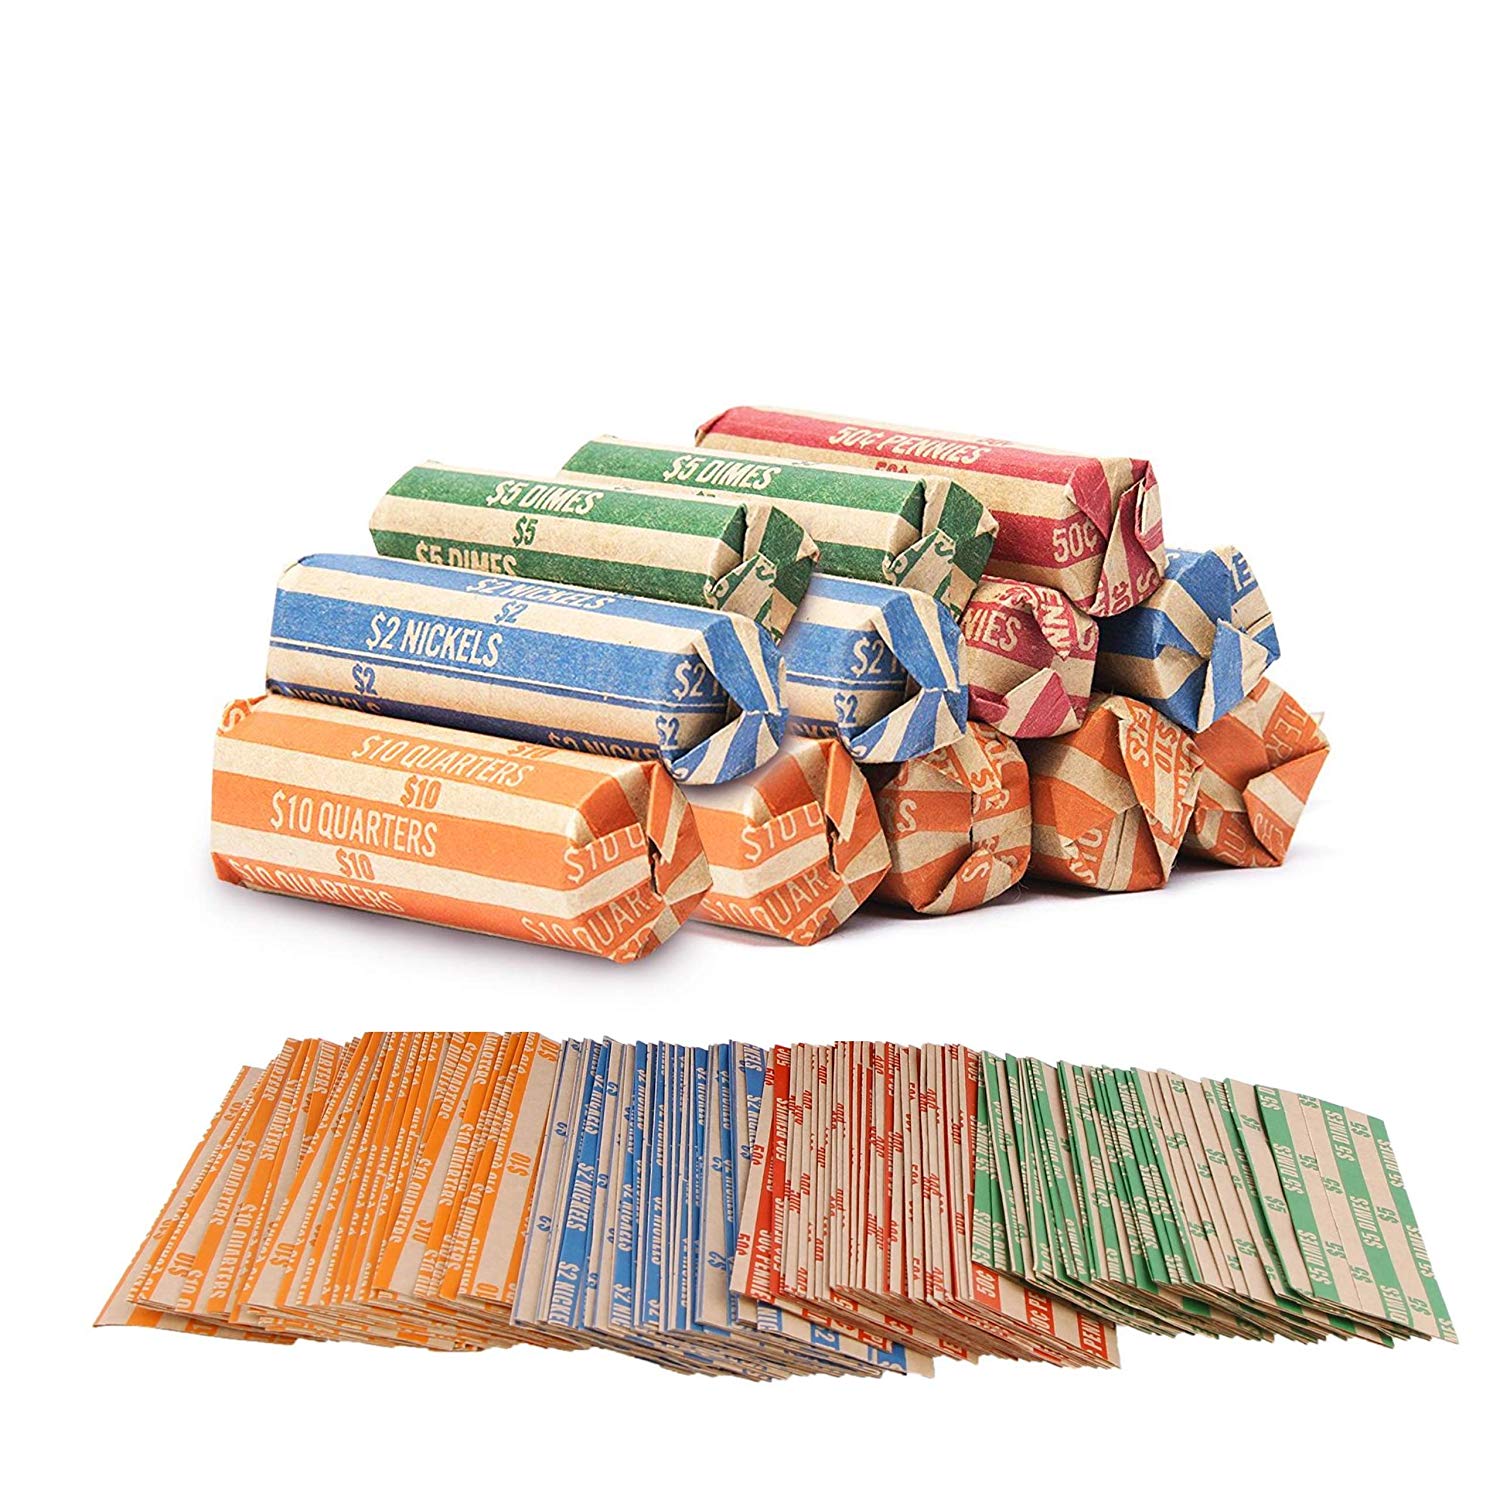 coin-roll-wrappers-500-count-assorted-flat-coin-papers-bundle-of-125-e